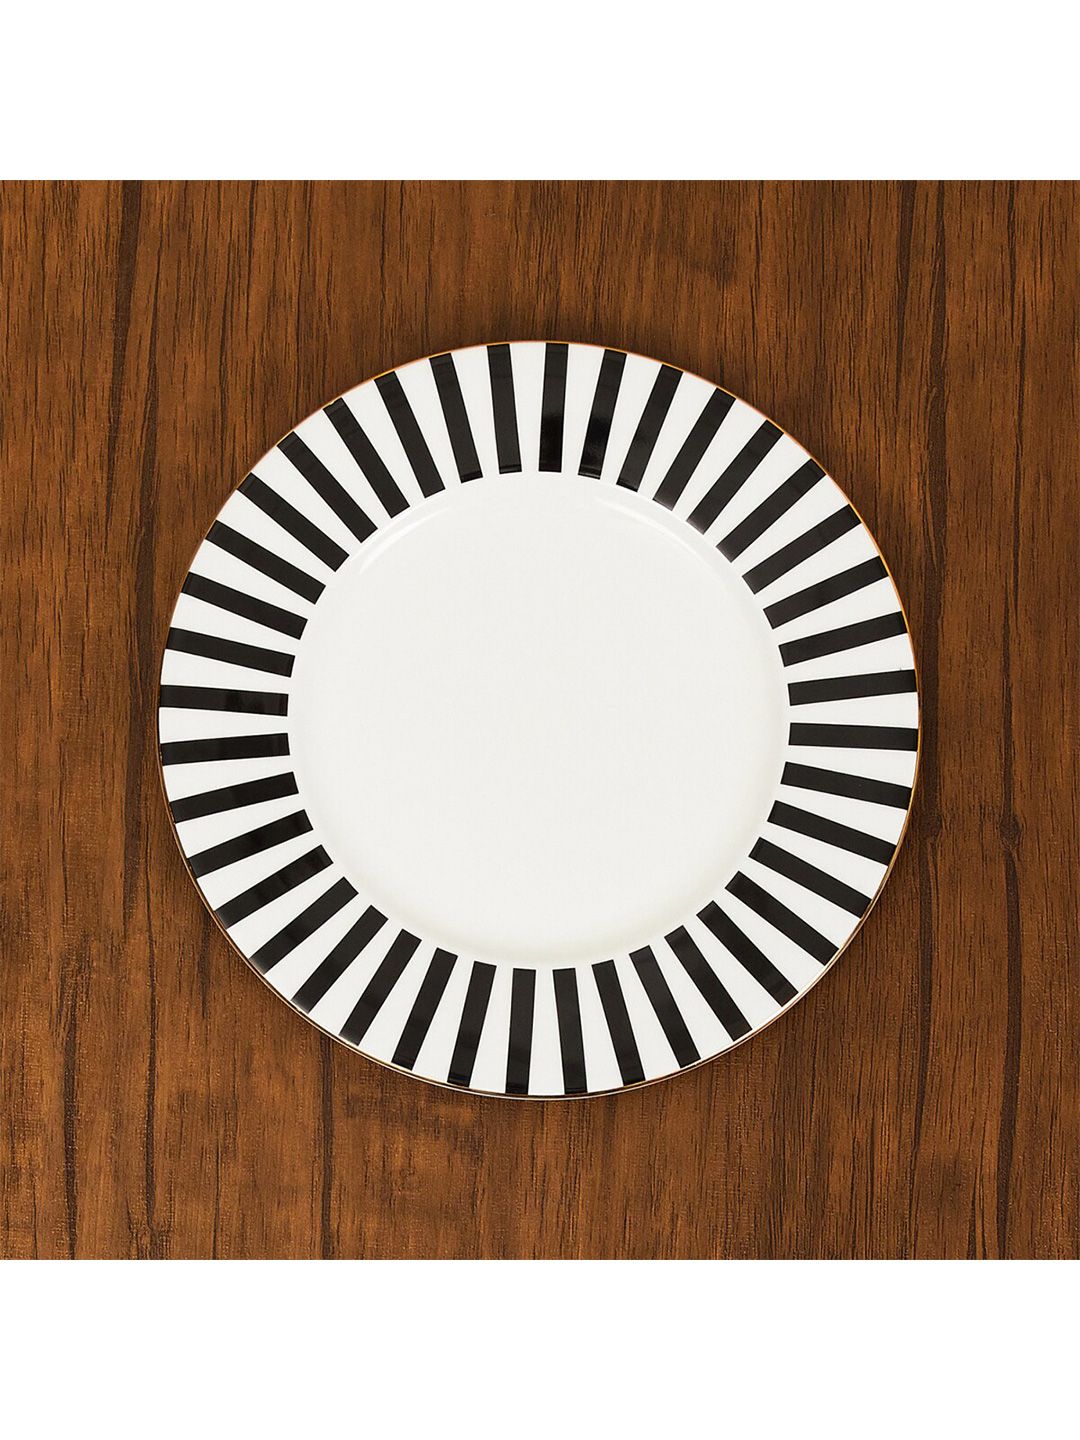 Home Centre White & Black 1 Pieces Printed Bone China Glossy Plates Price in India